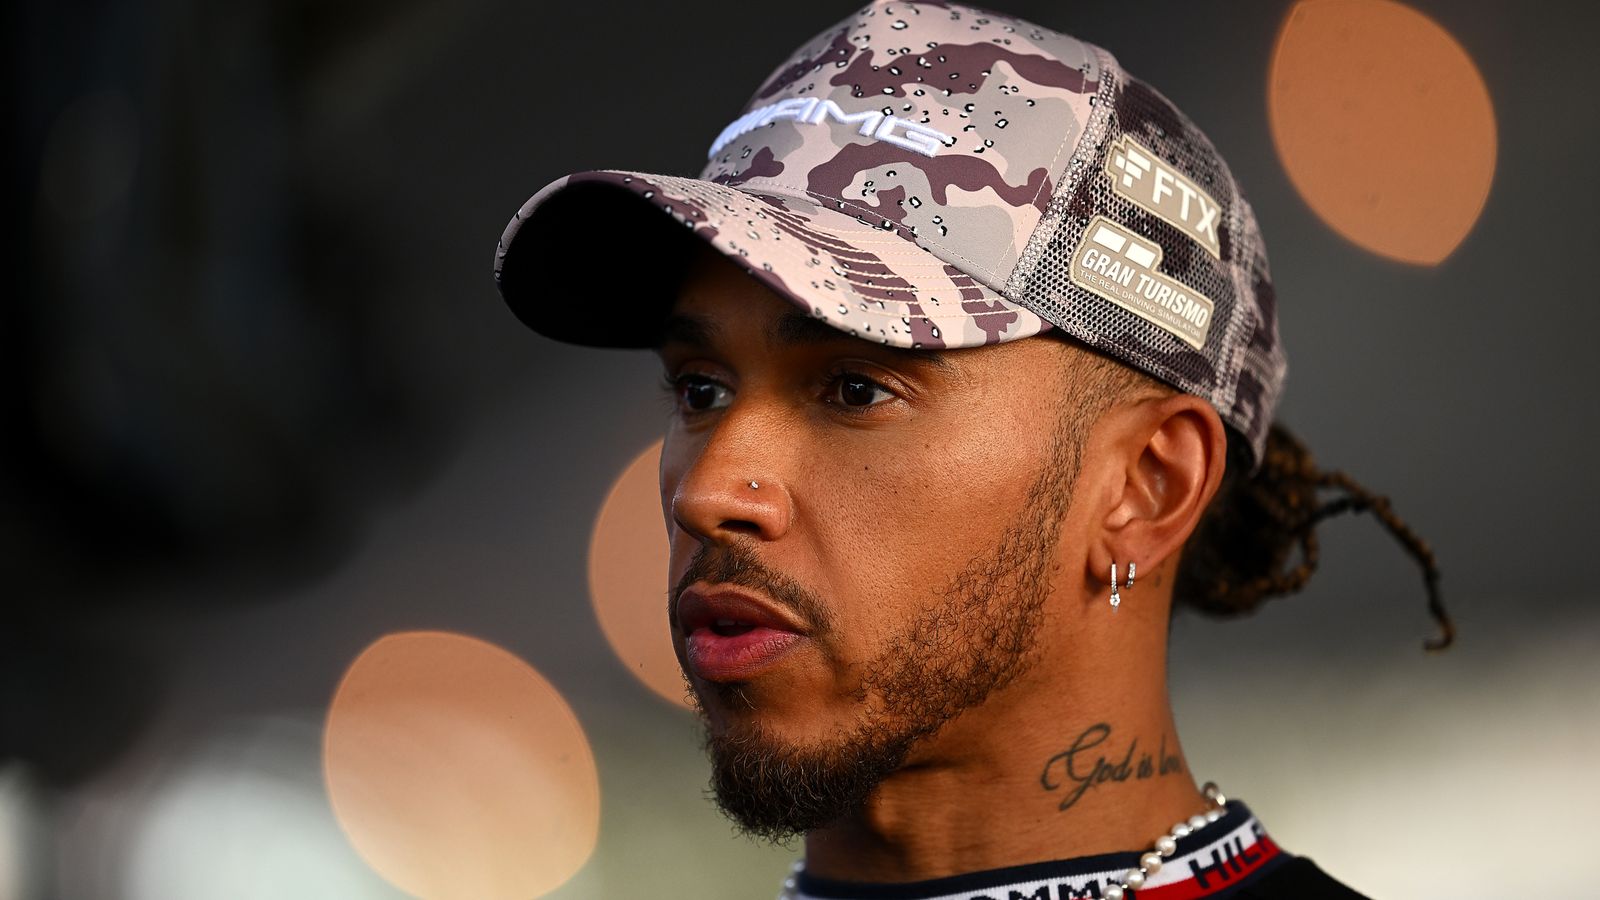 United States GP: Lewis Hamilton downbeat after Mercedes upgrade fails to meet his expectations